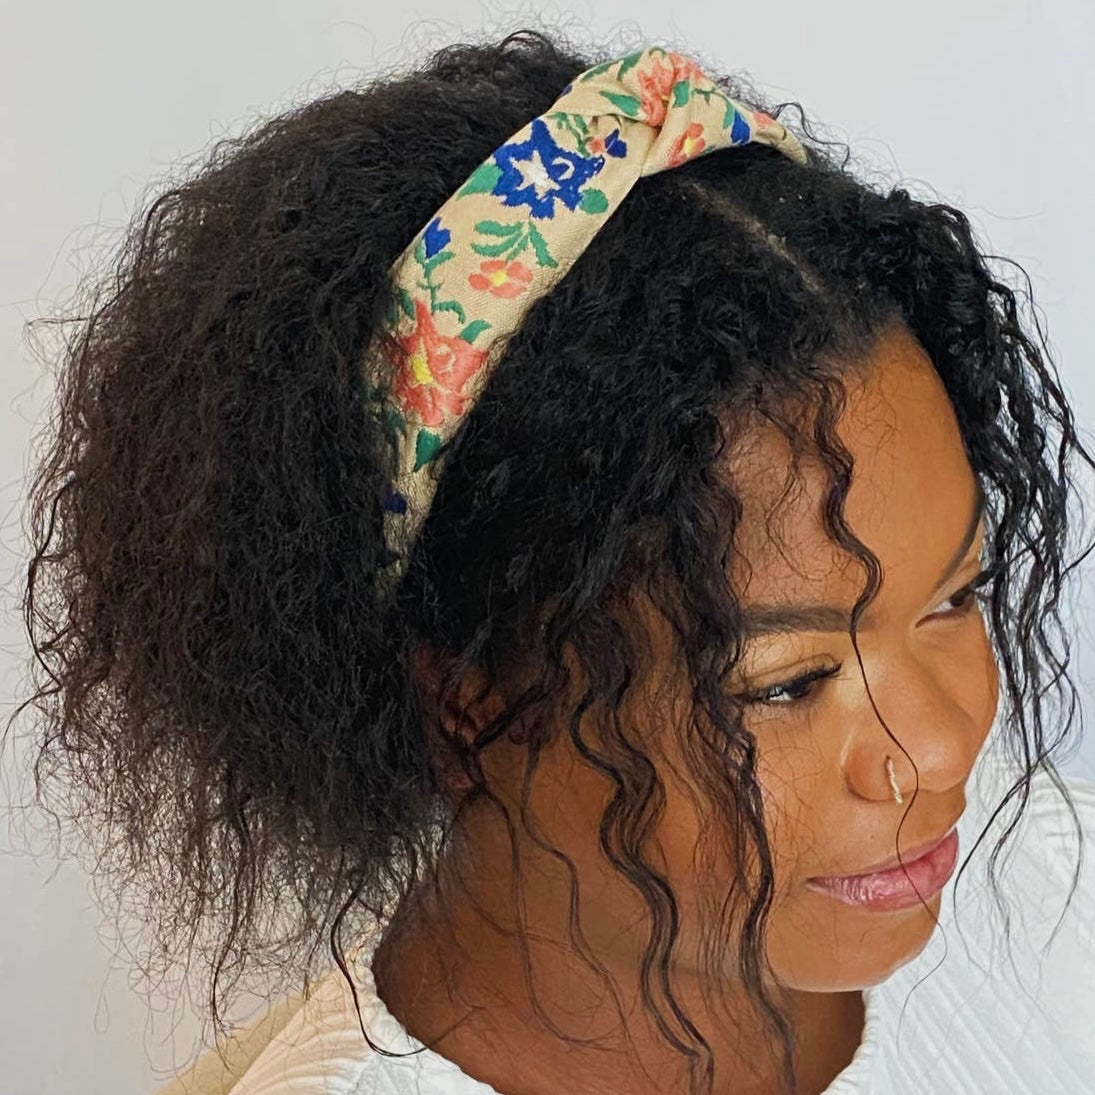 French Floral Embroidered Headband